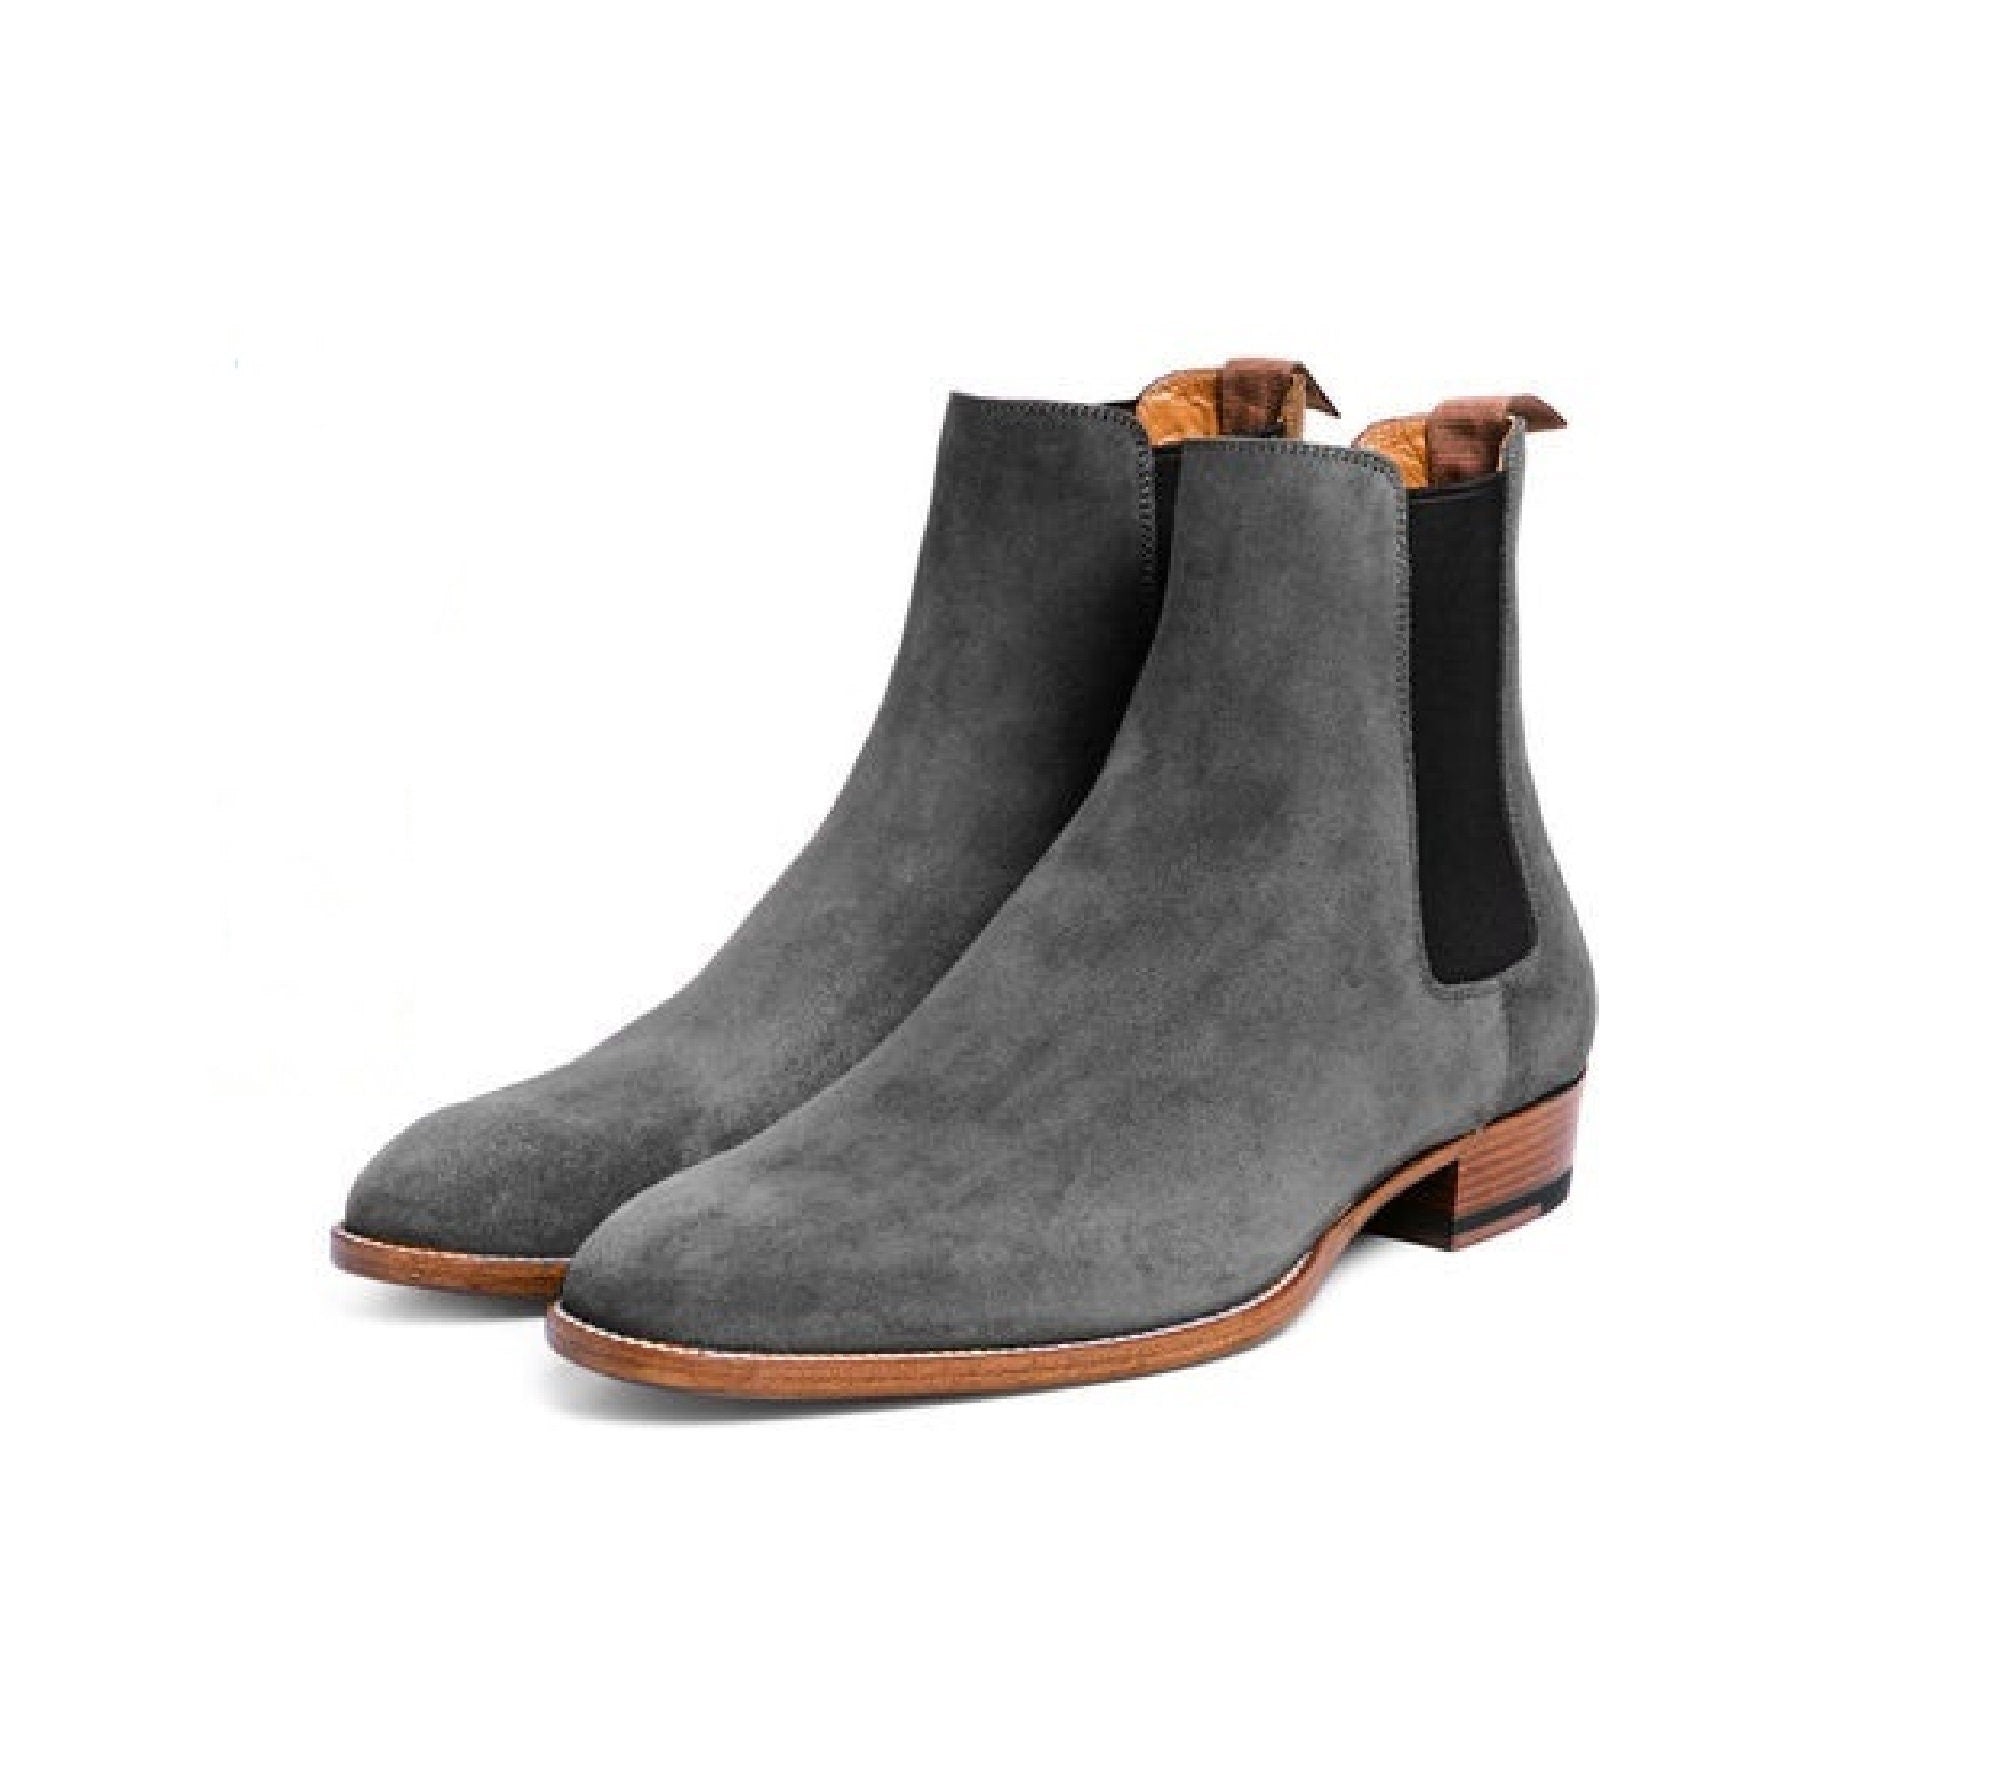 Men's Grey Suede Chelsea Formal Ankle High Boot SALE, Men Boot, Men Leather Boot